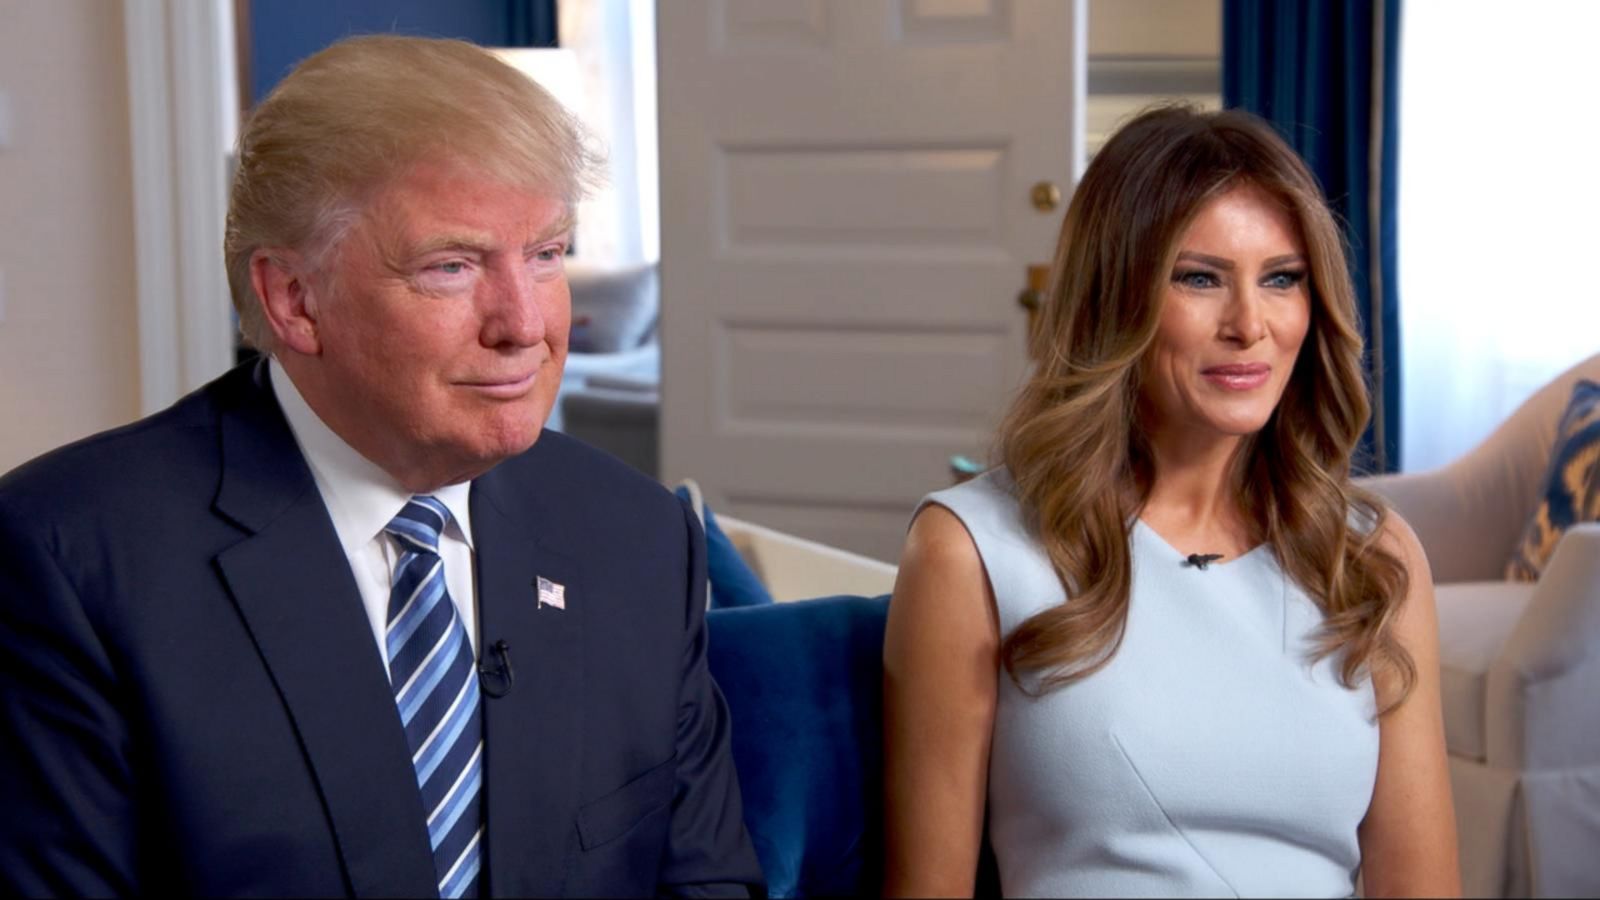 Donald Trump and Family Discuss His Path to Victory